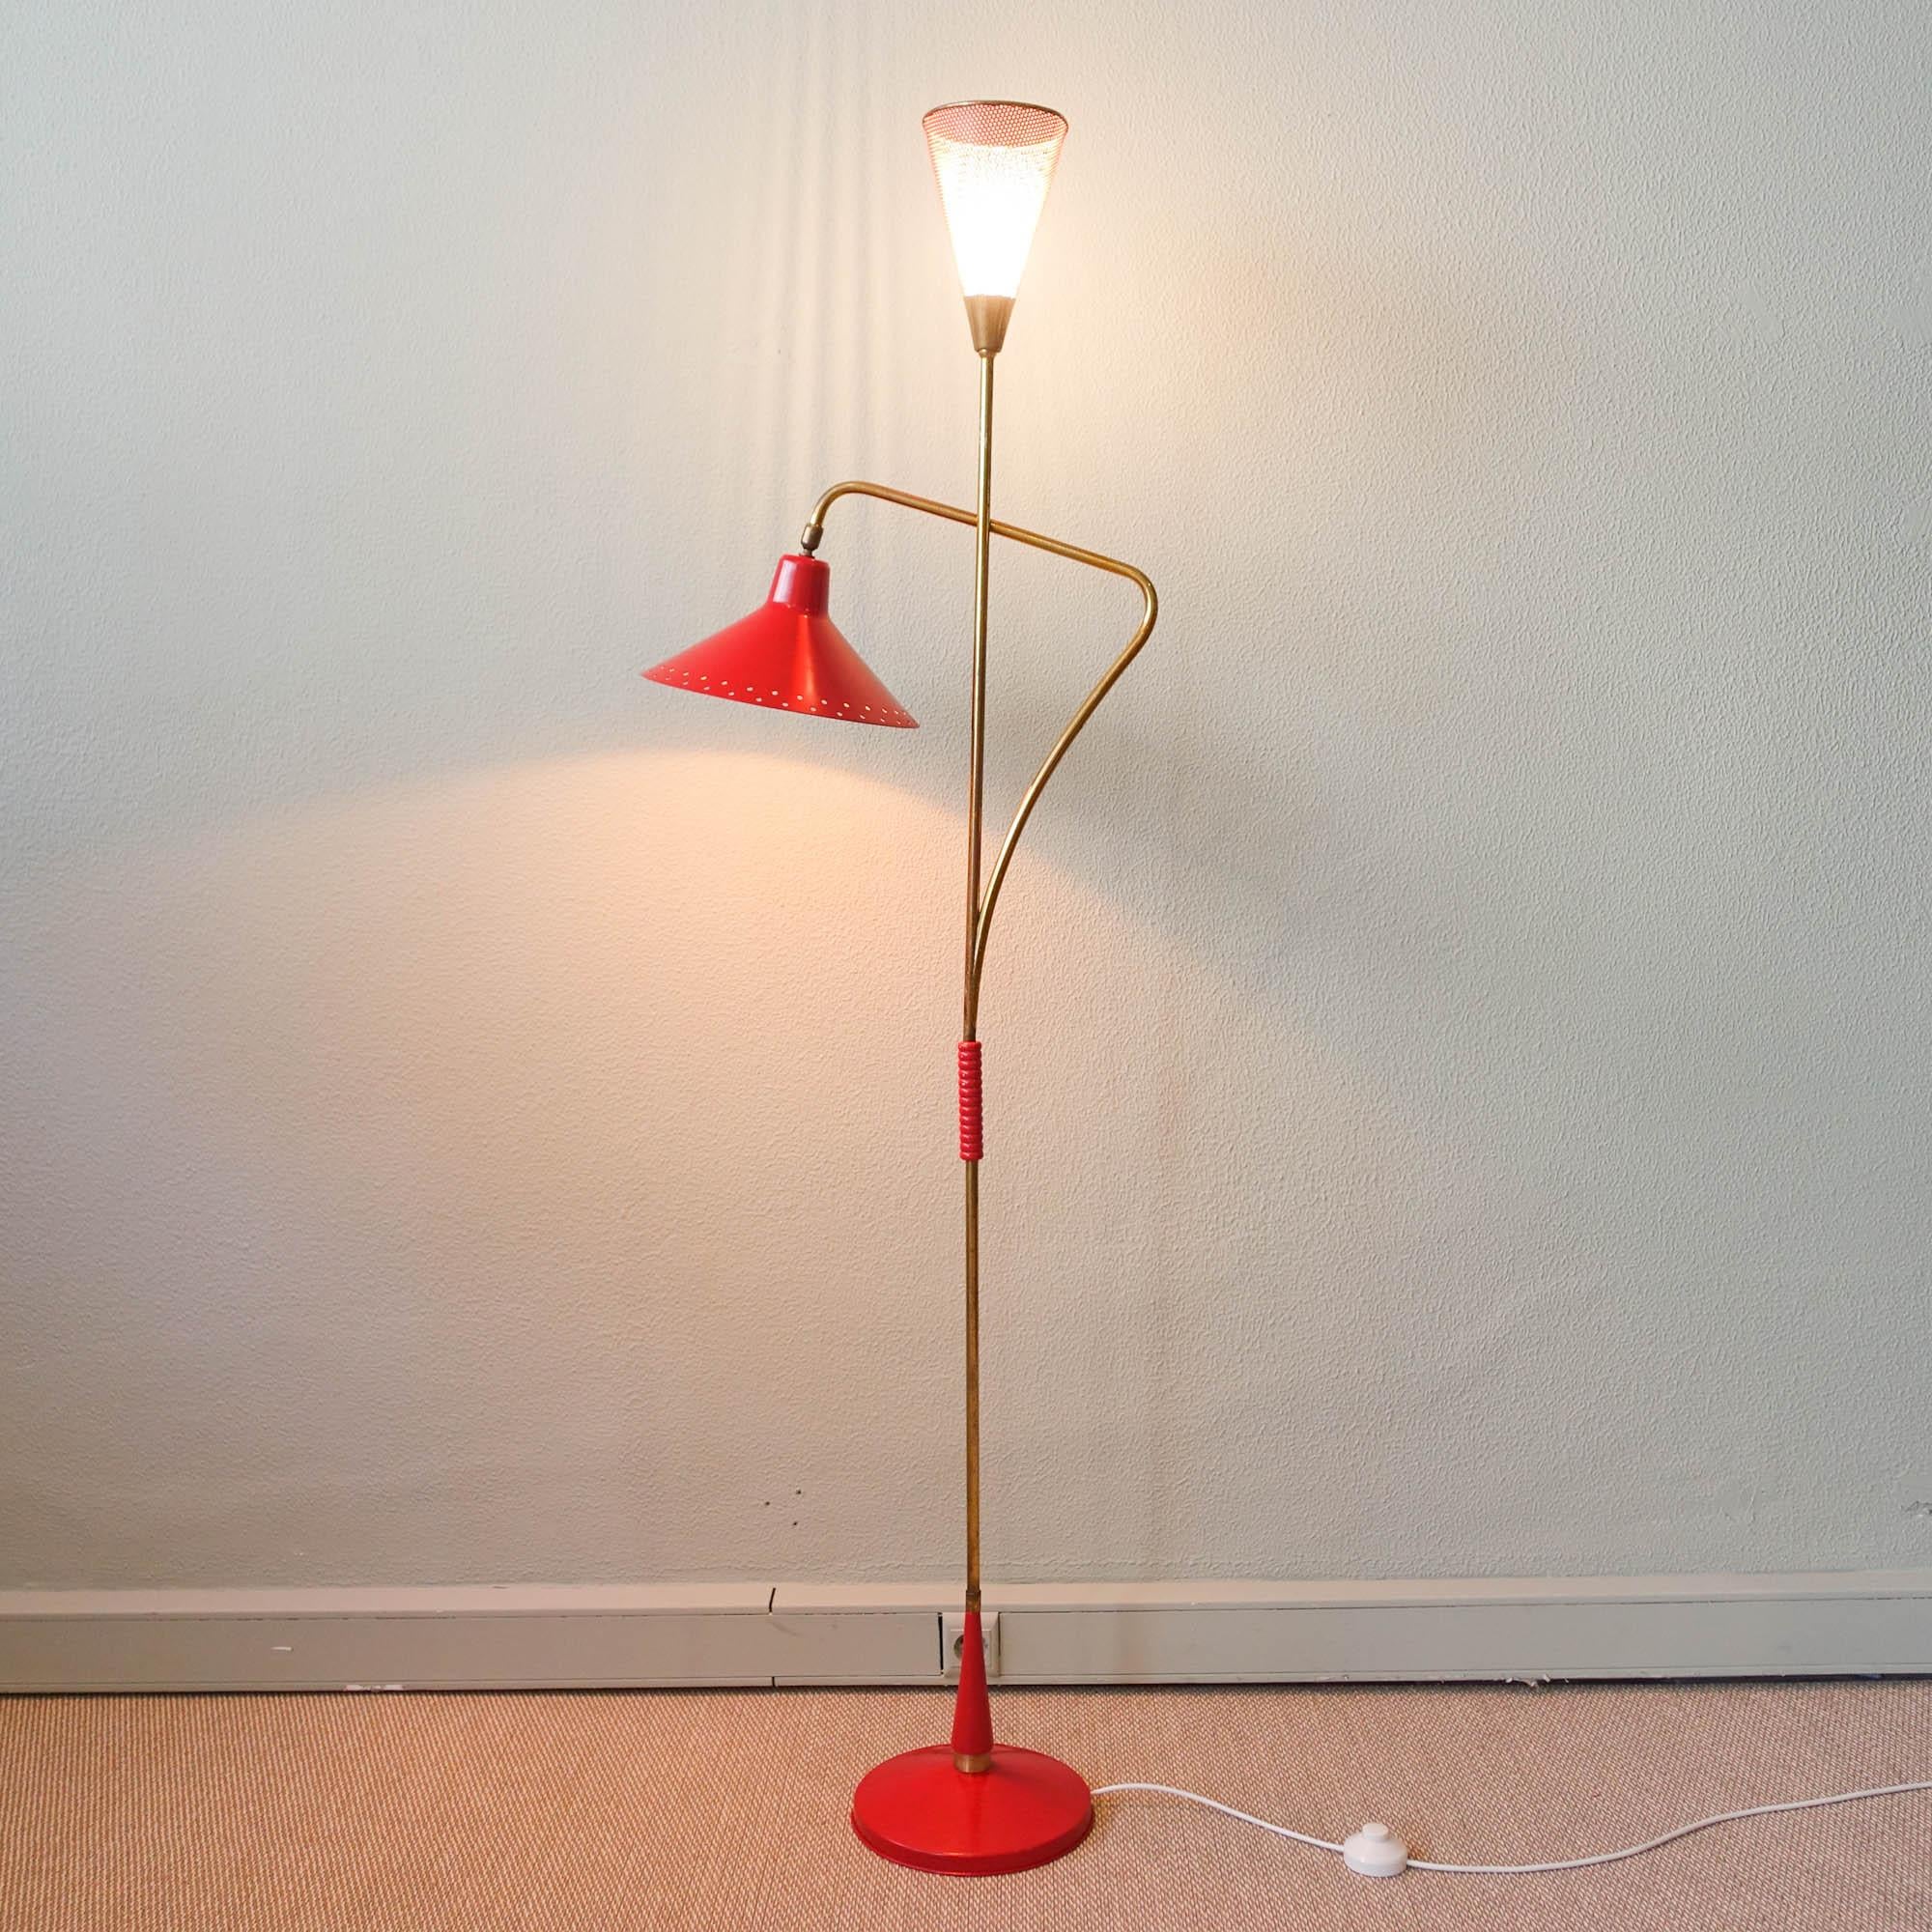 This double shade floor lamp was designed by Giuseppe Ostuni and produced in Italy during the 1950's. It has two metal shades, one in facing up in red perforated metal and the other, facing down in red, that are attached to a brass arm. With an